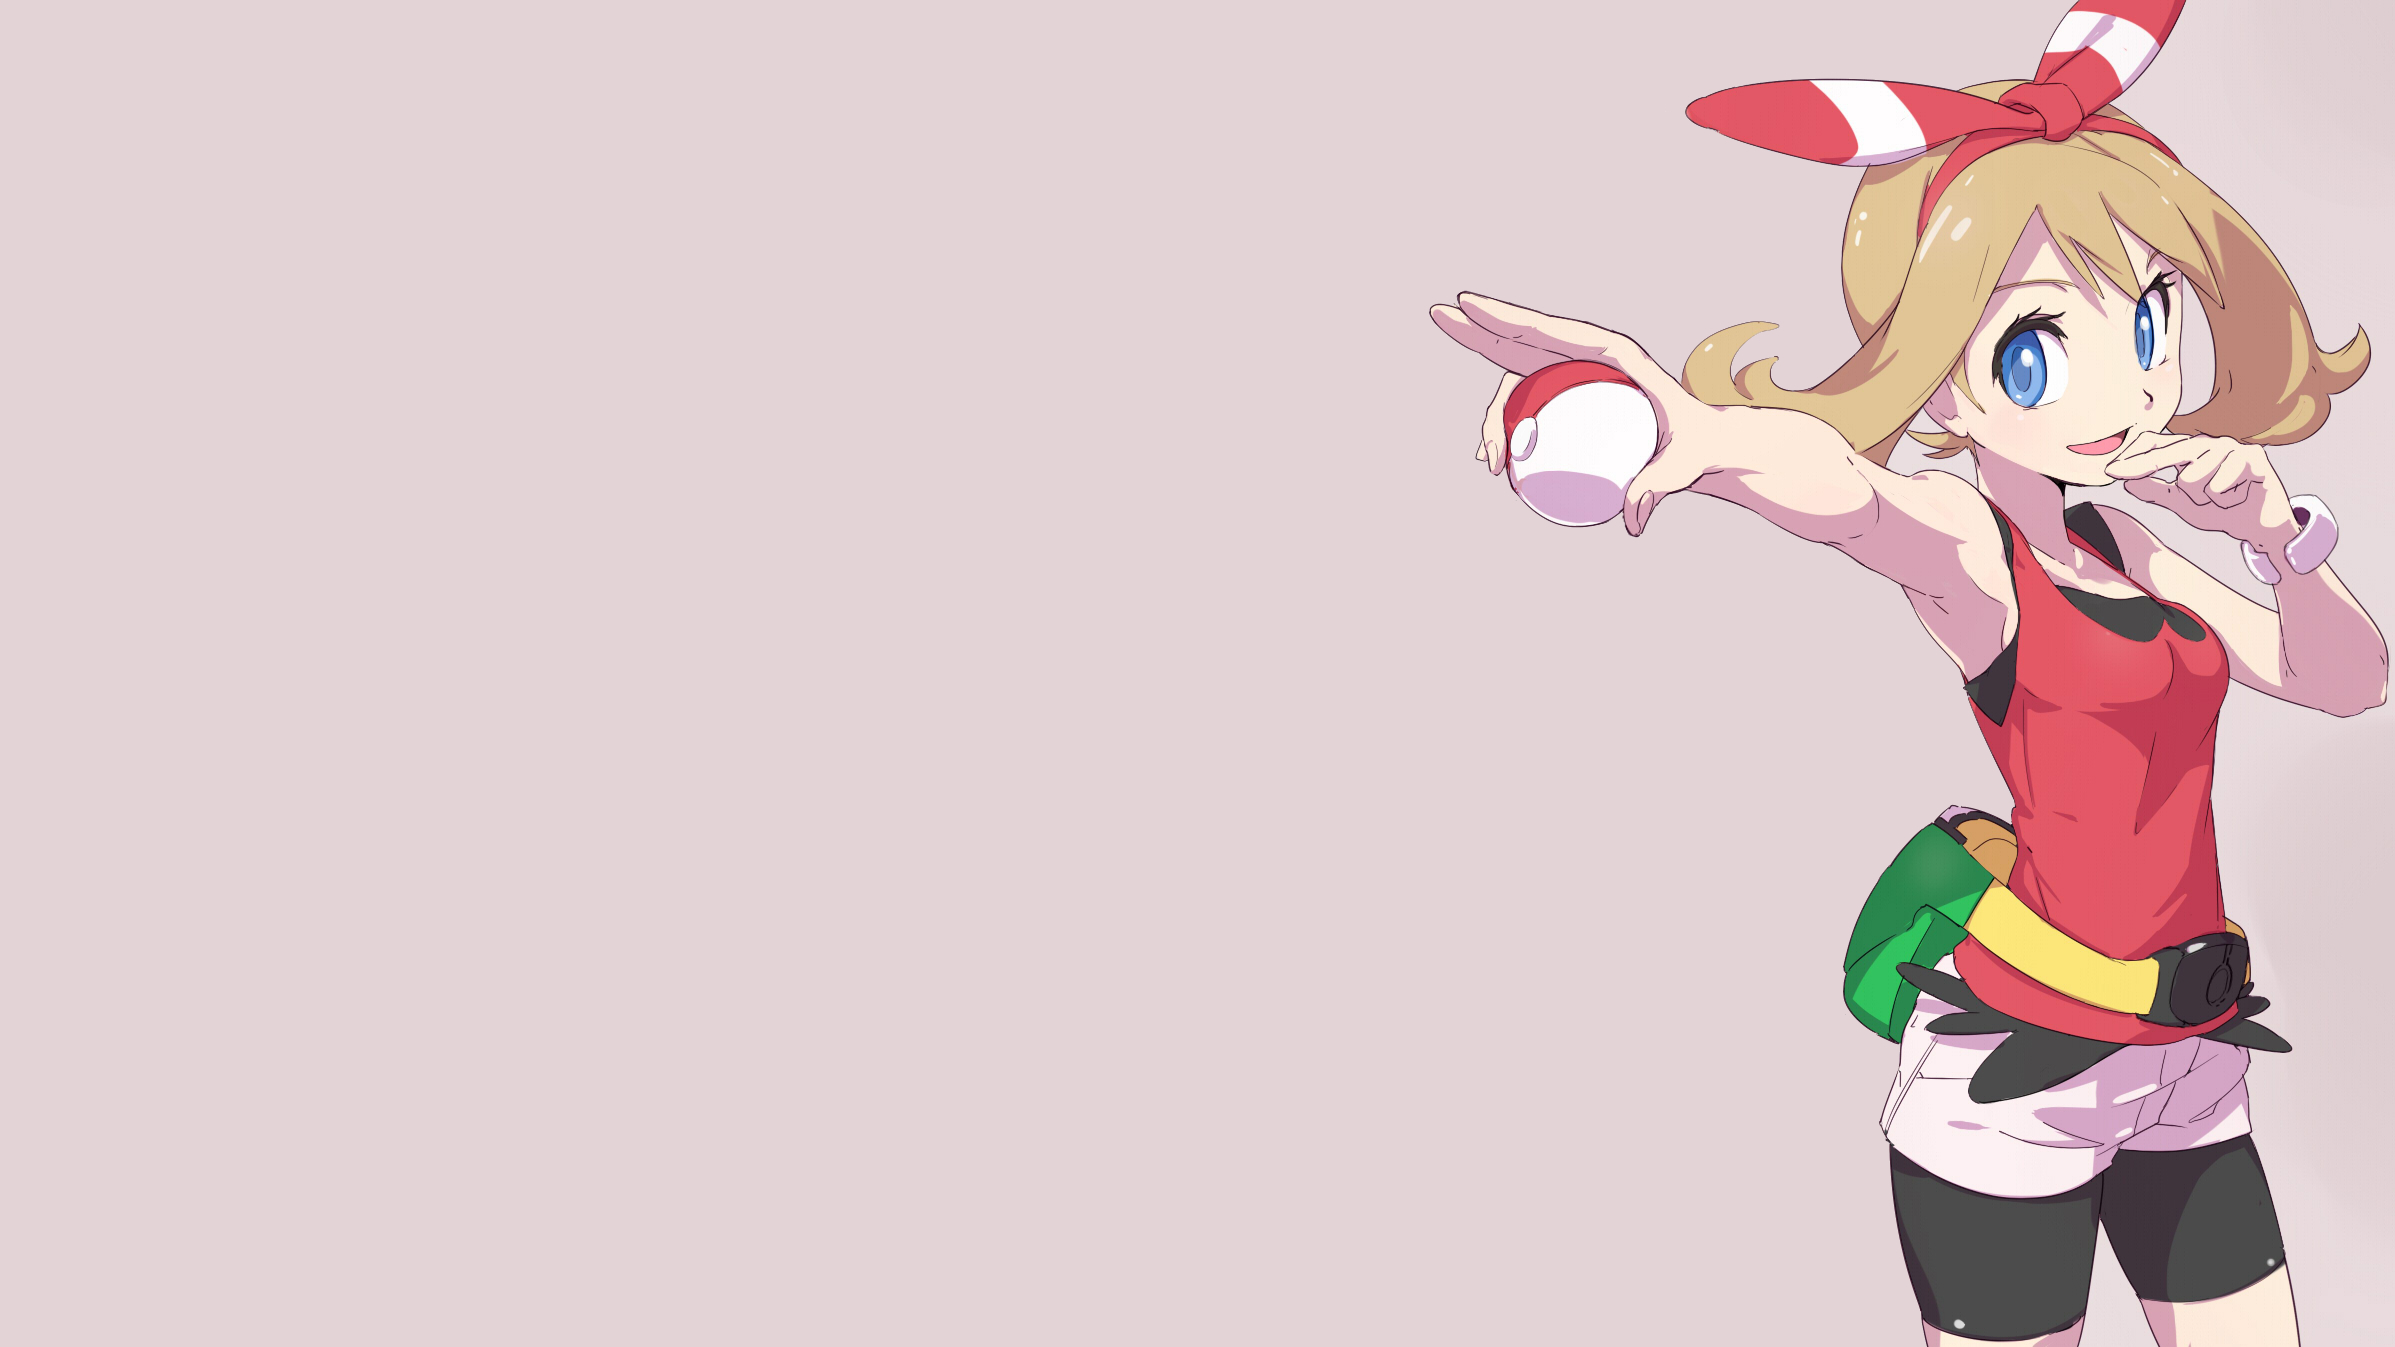 2395x1347 Wallpaper : simple background, May pokemon, anime girls bdgaylord 1691067 HD Wallpapers